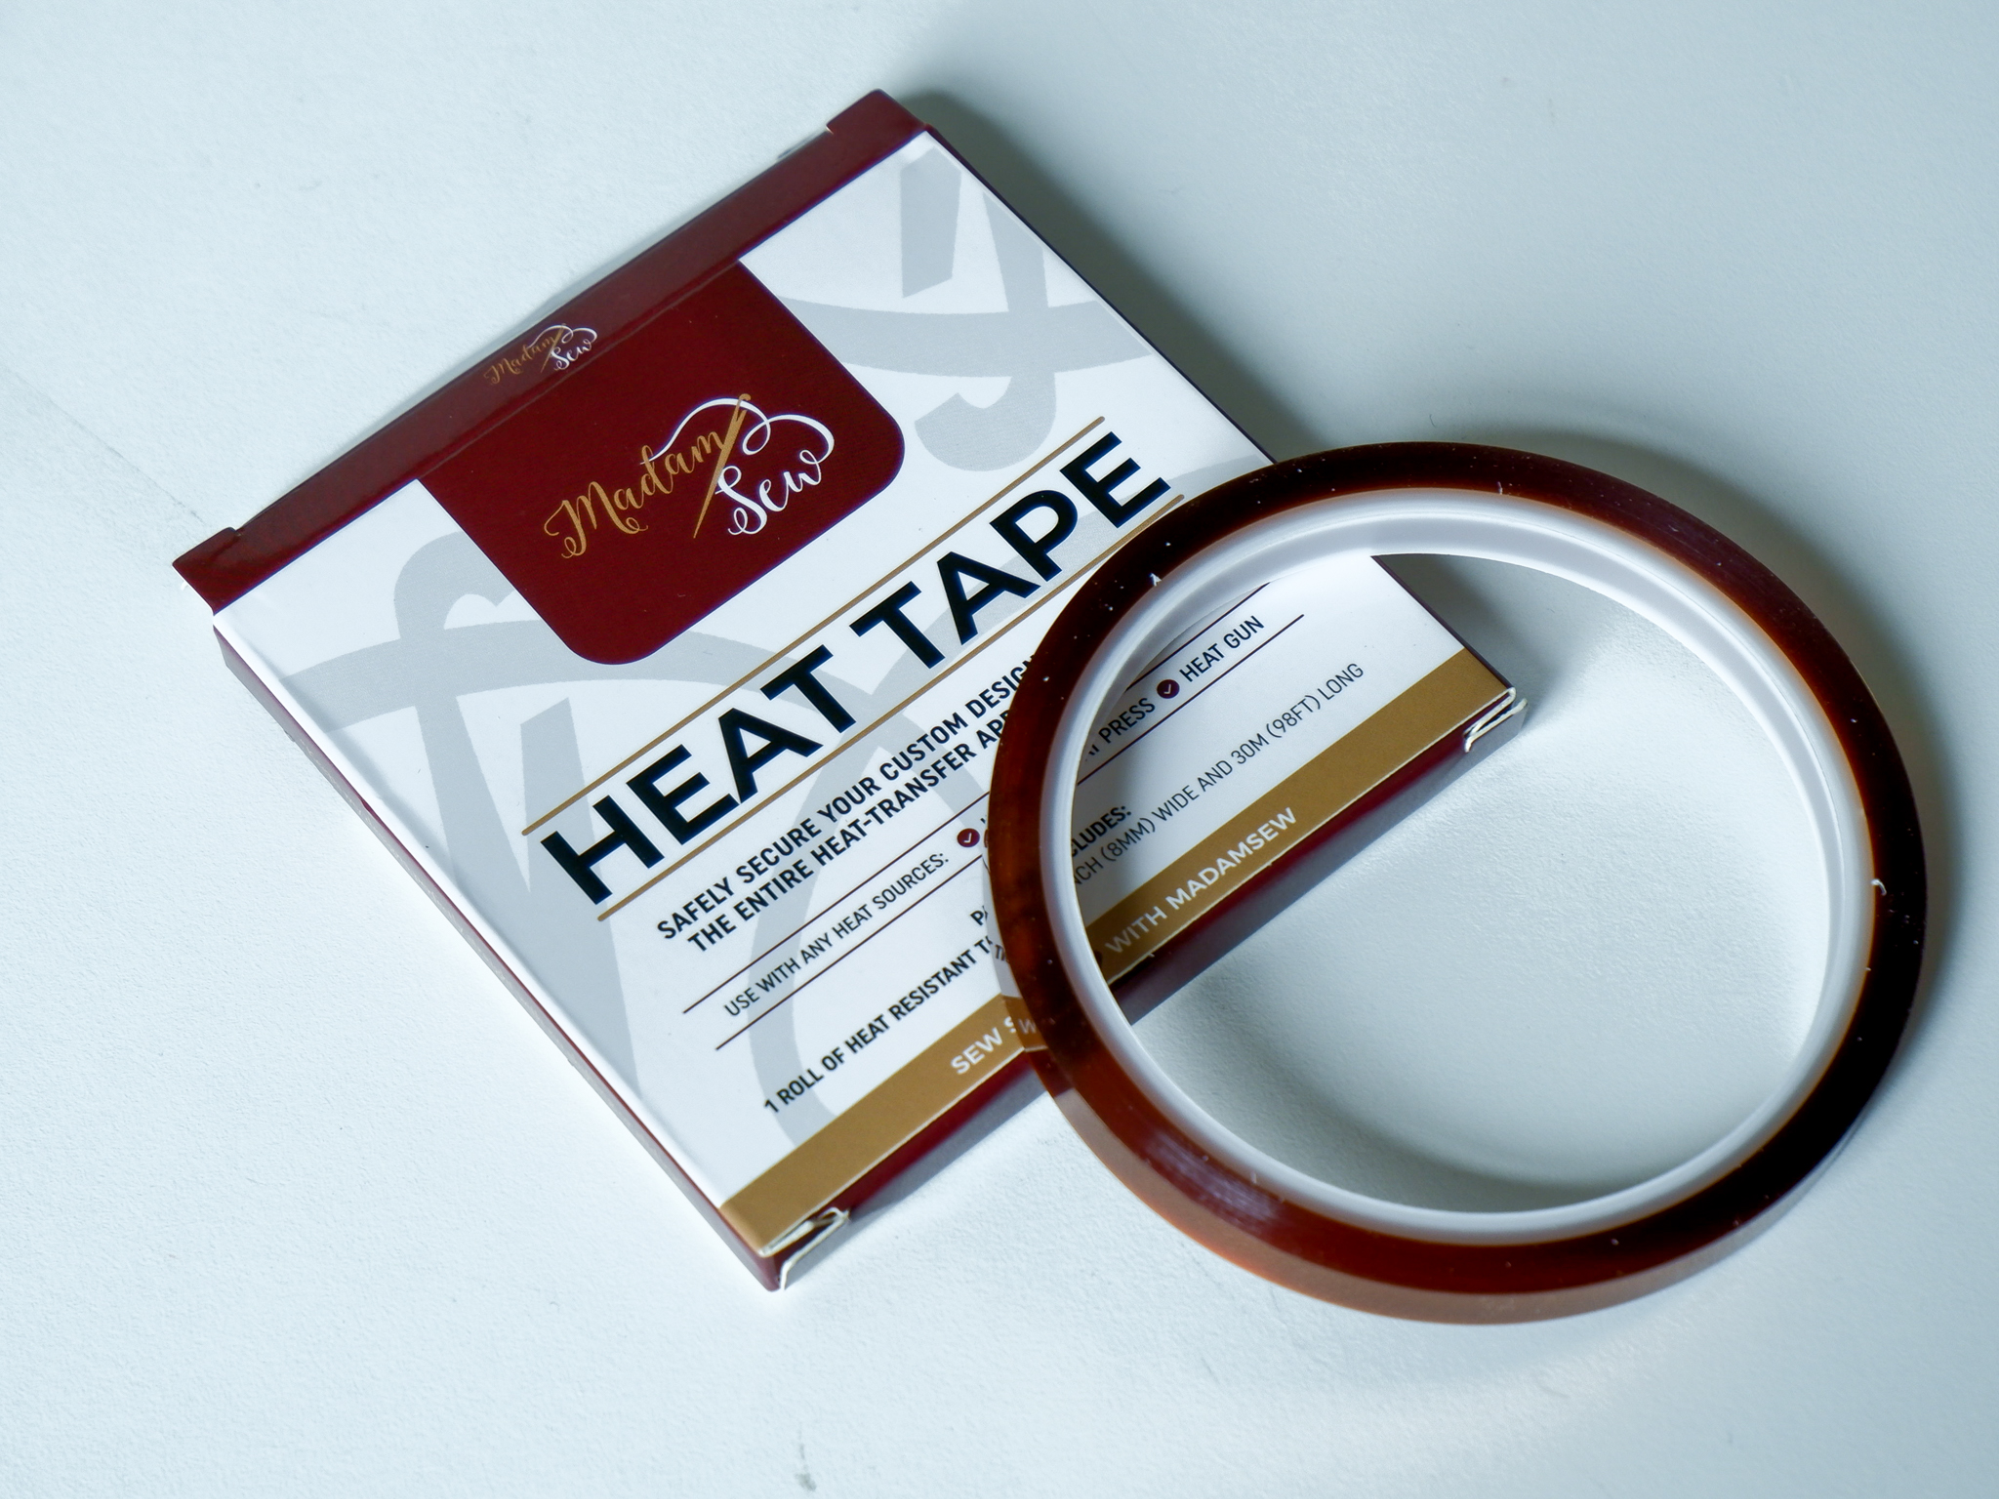 Teflon Sheets, Teflon Pillows for Heat Press, and Thermal Tape for